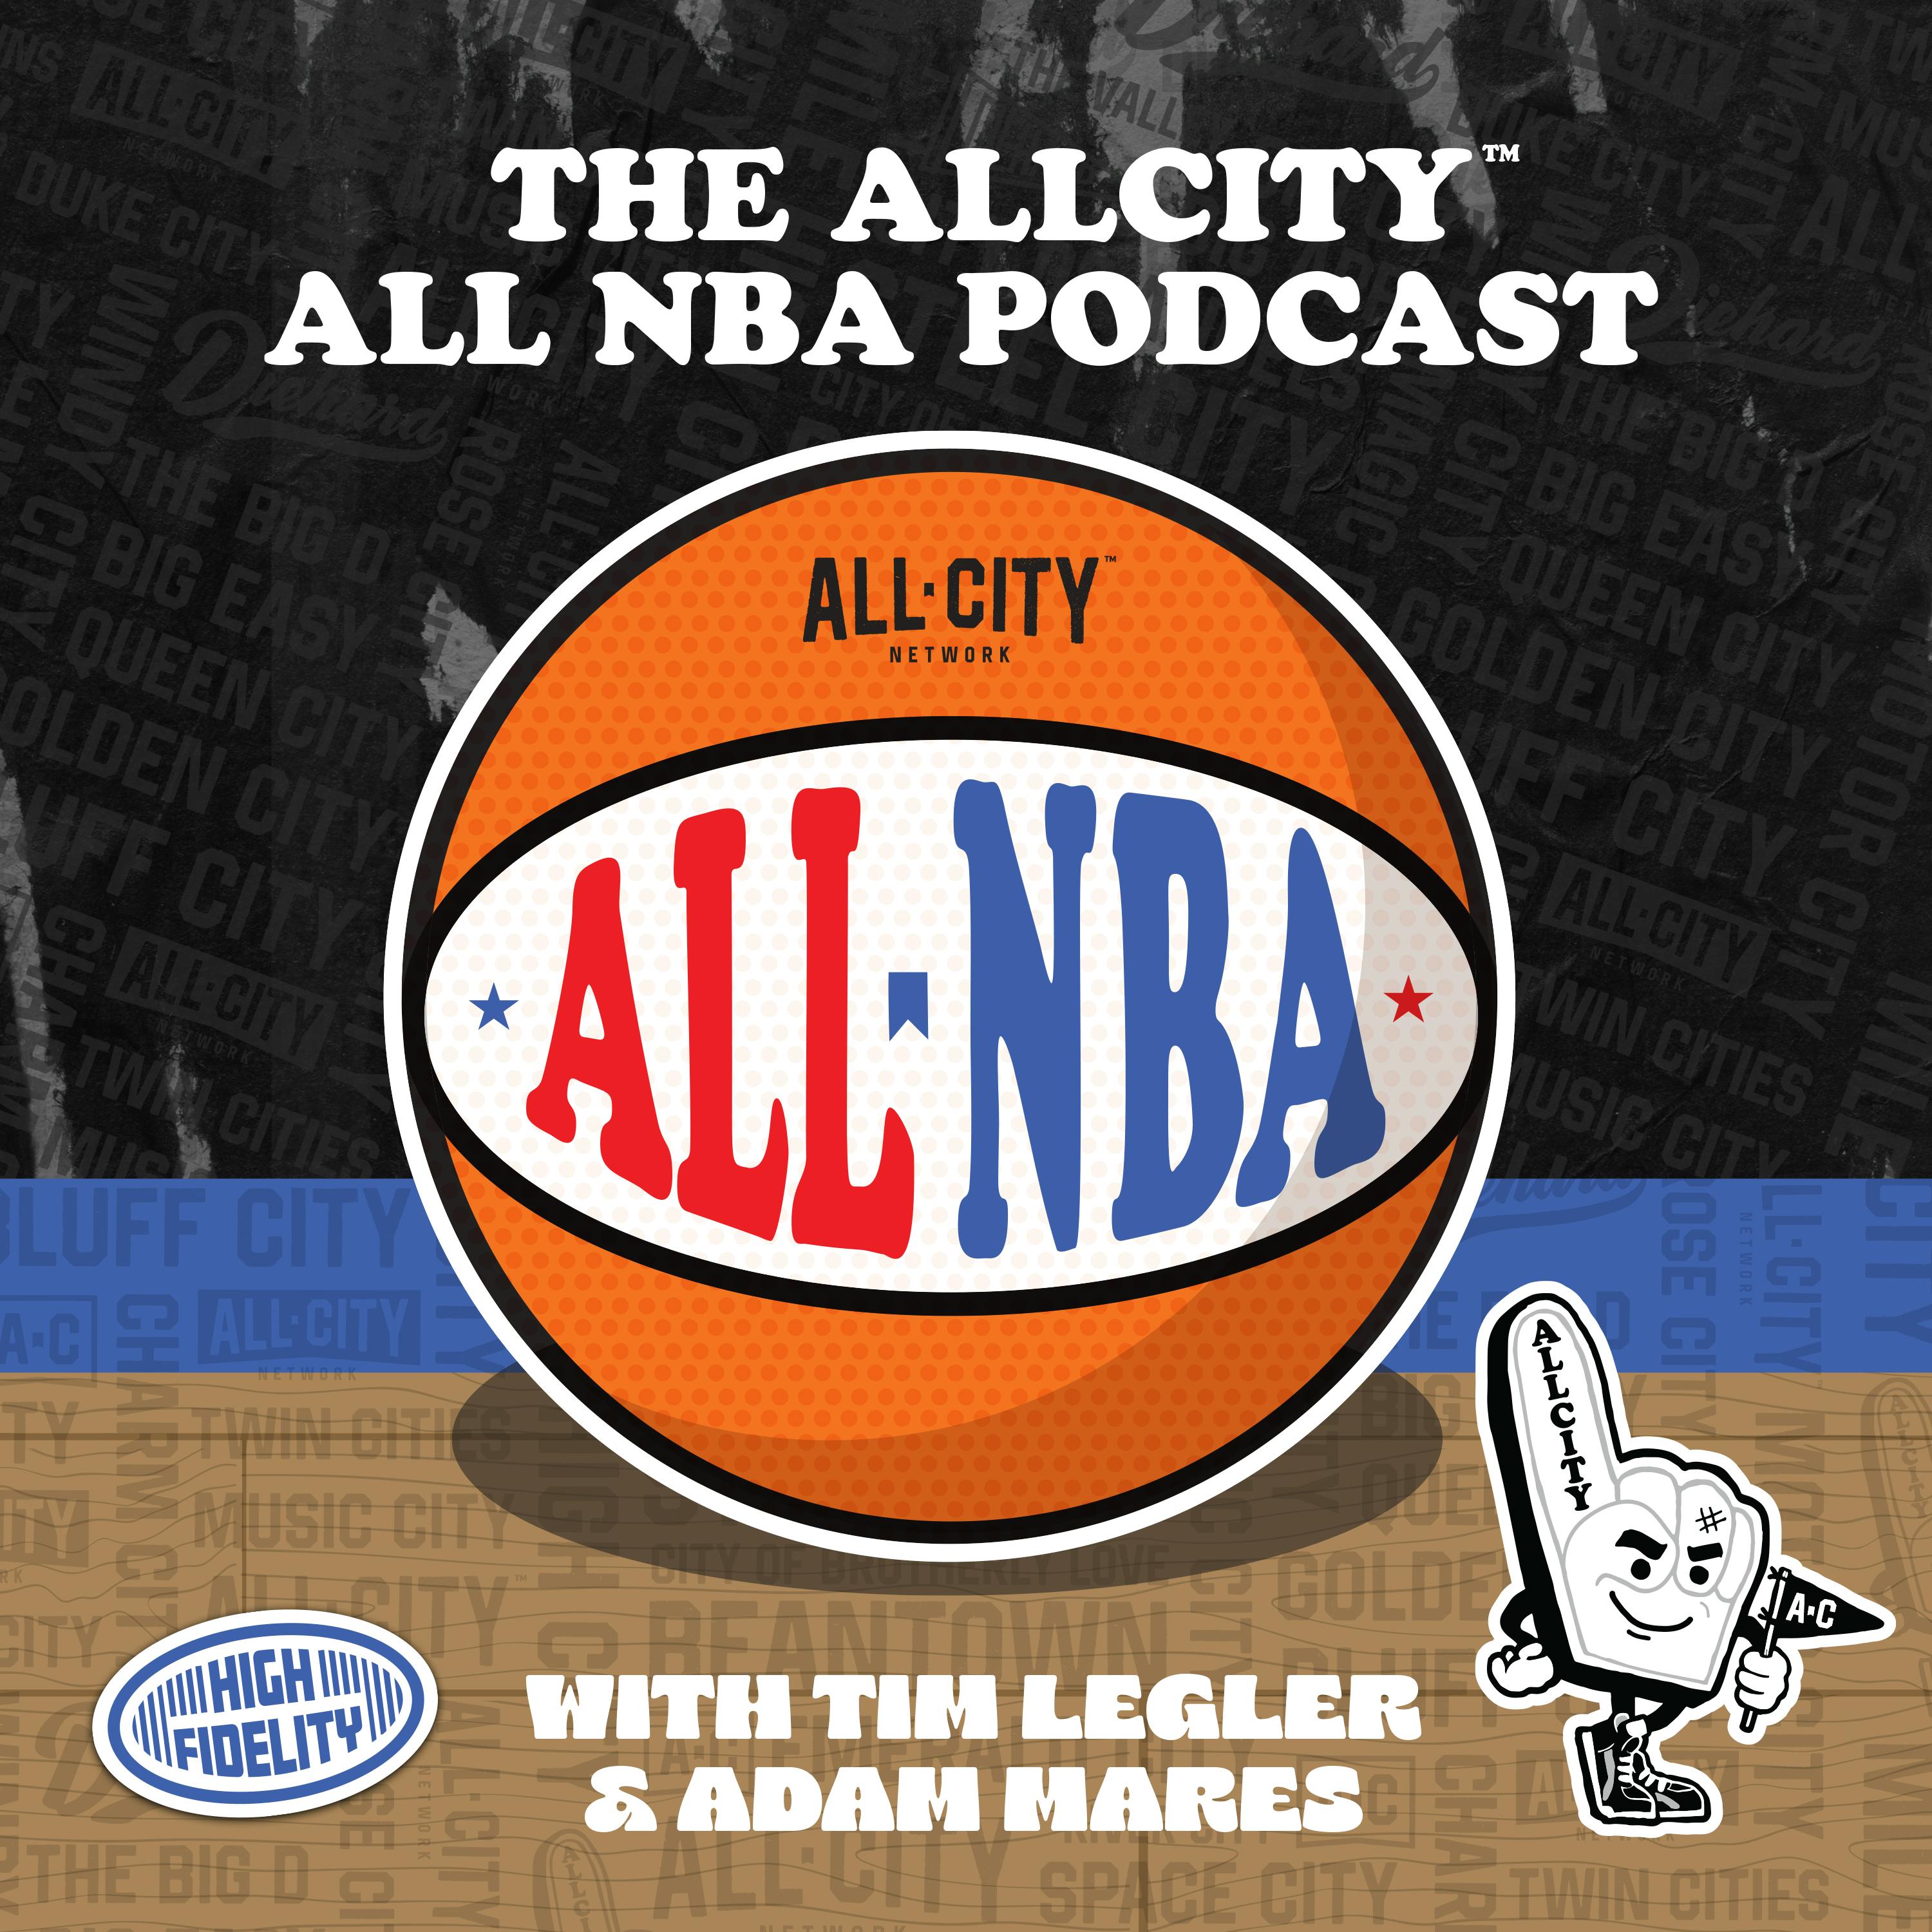 The ALL NBA Podcast: Do LeBron James and the Lakers have the blueprint for beating the OKC Thunder?